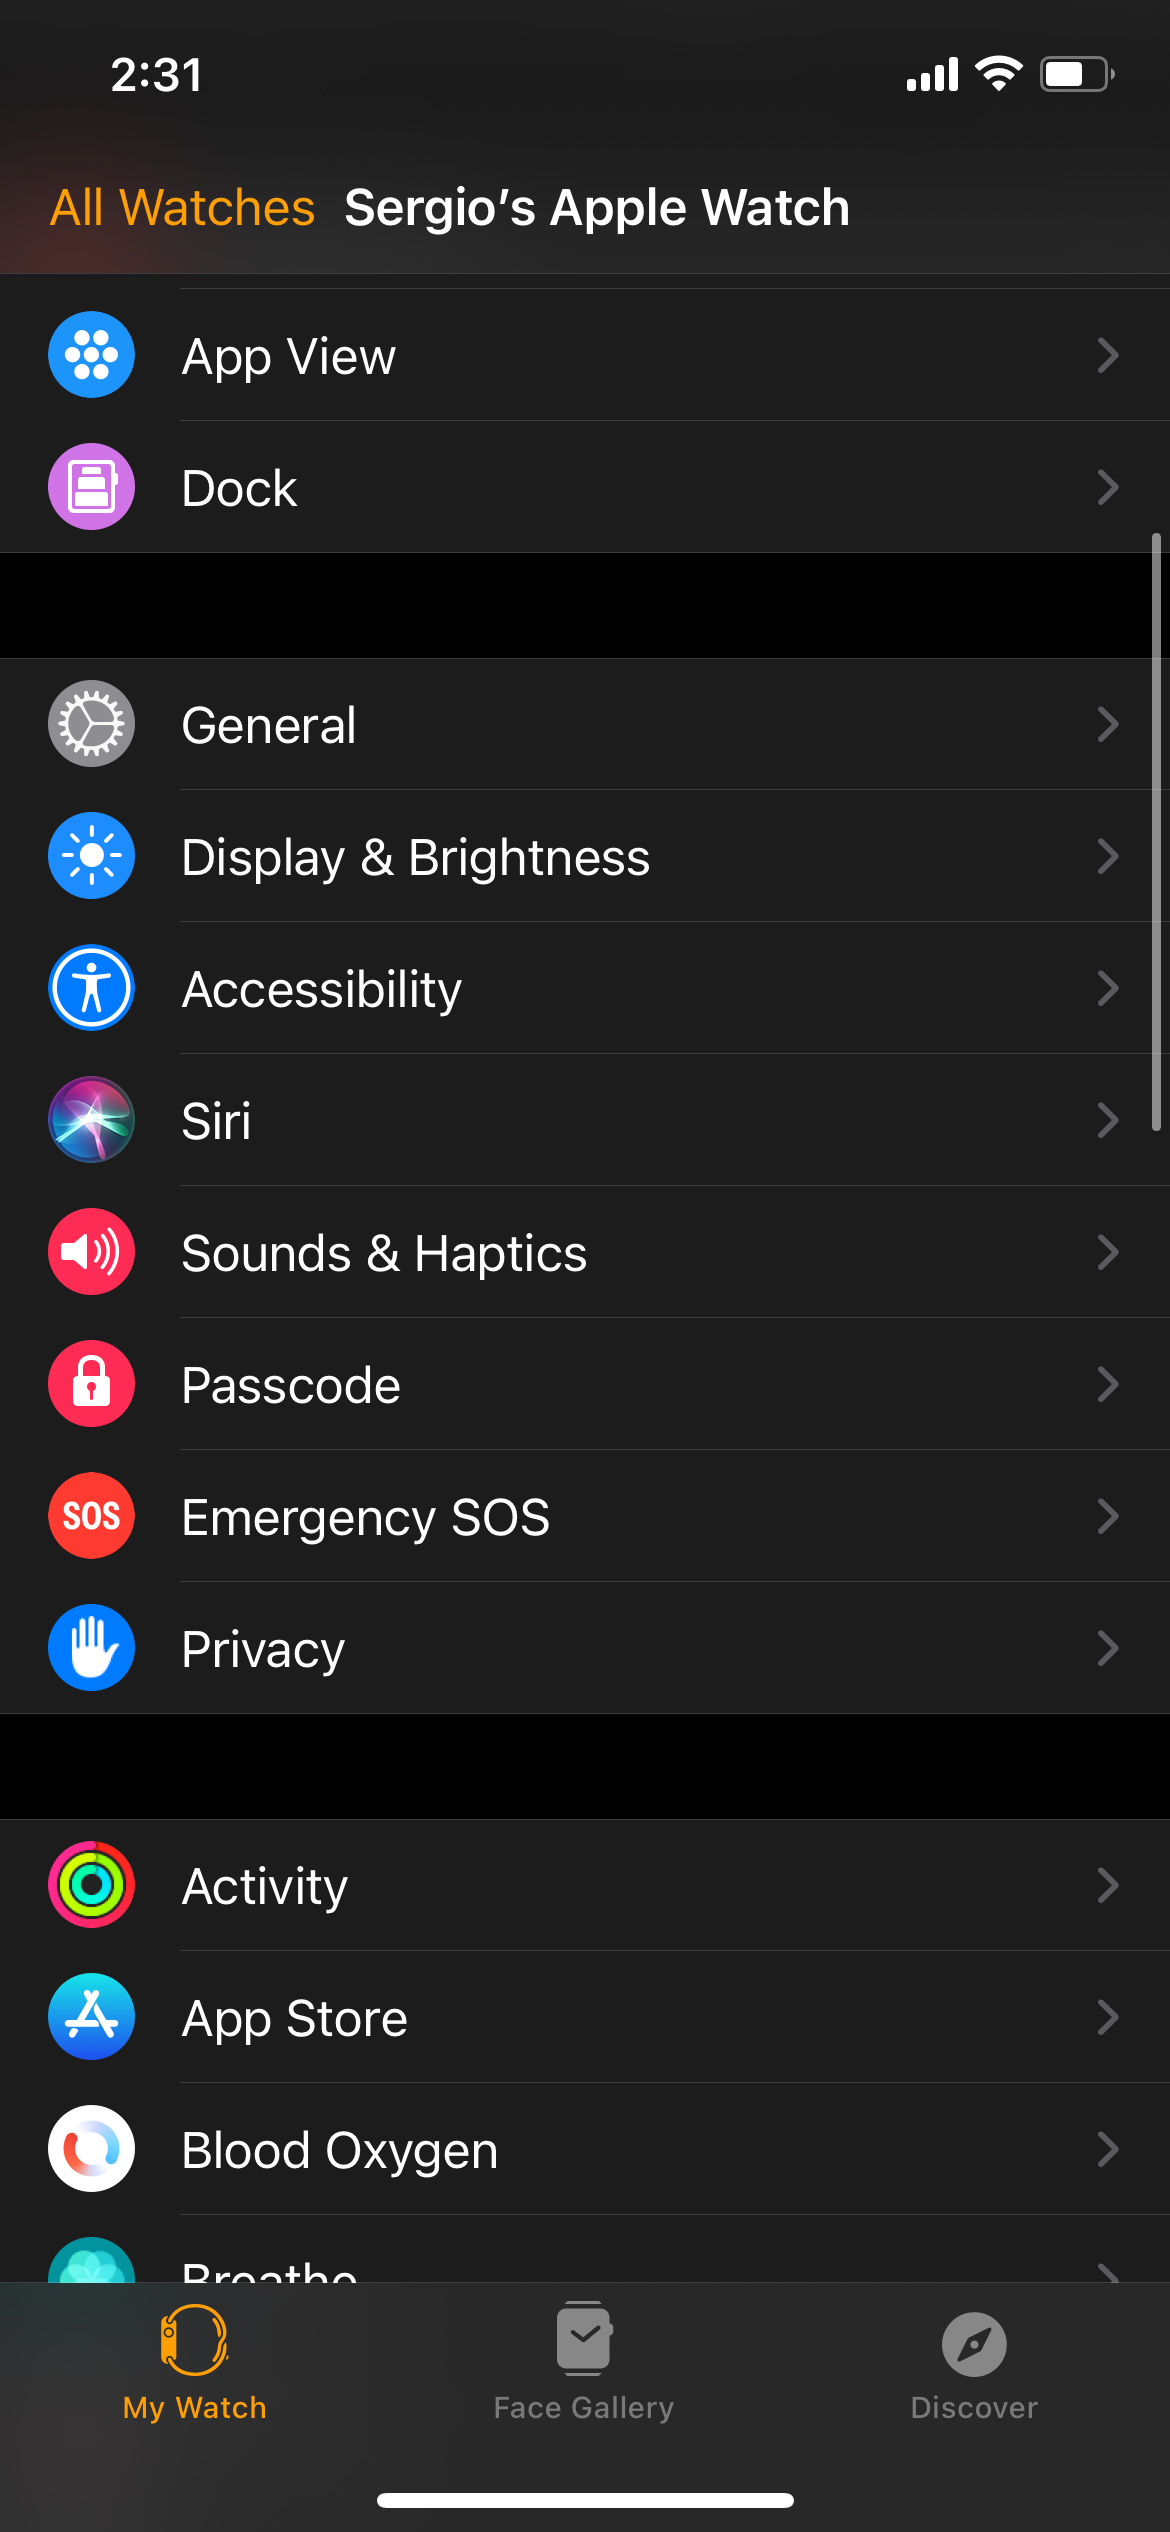 General settings in the Watch app on iPhone.